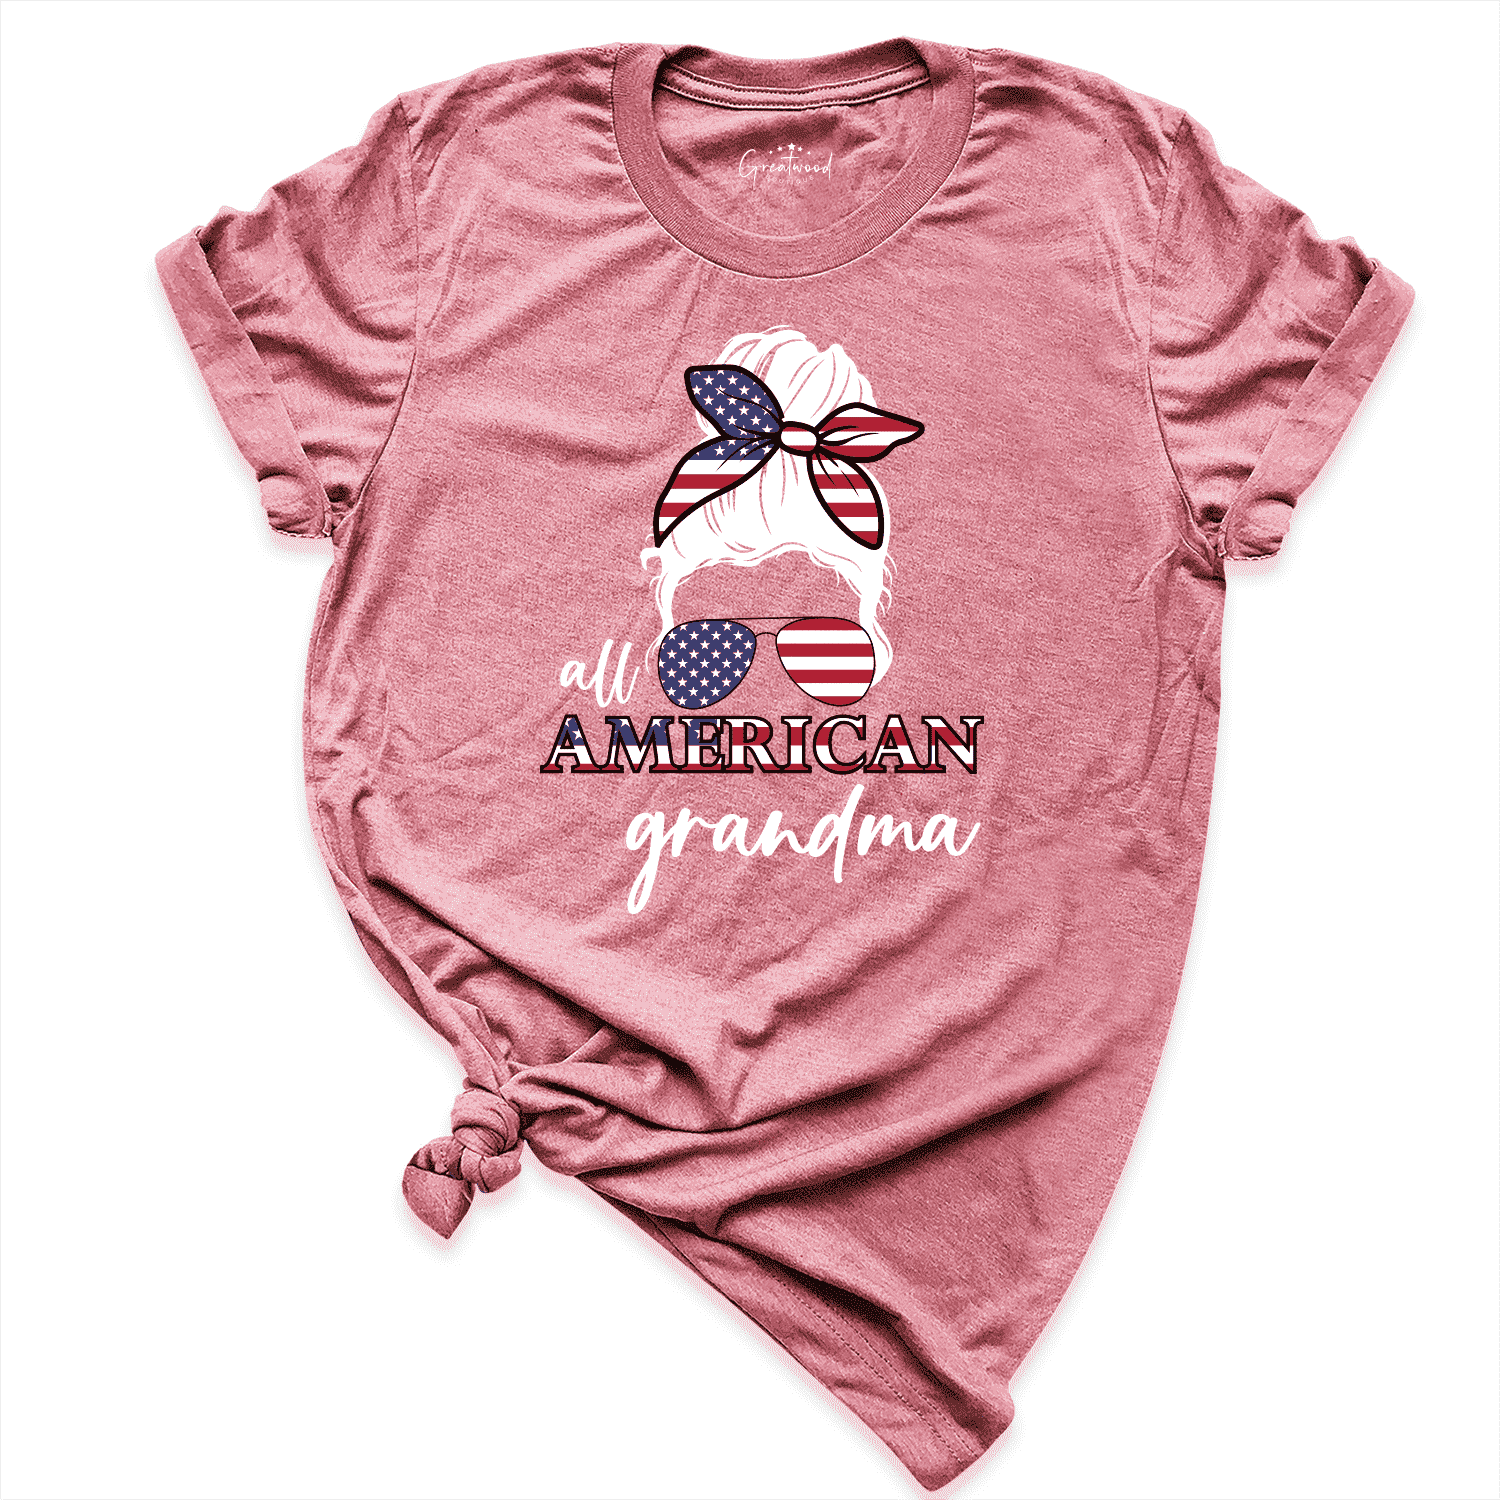 All American Family Shirt Mauve - Greatwood Boutique